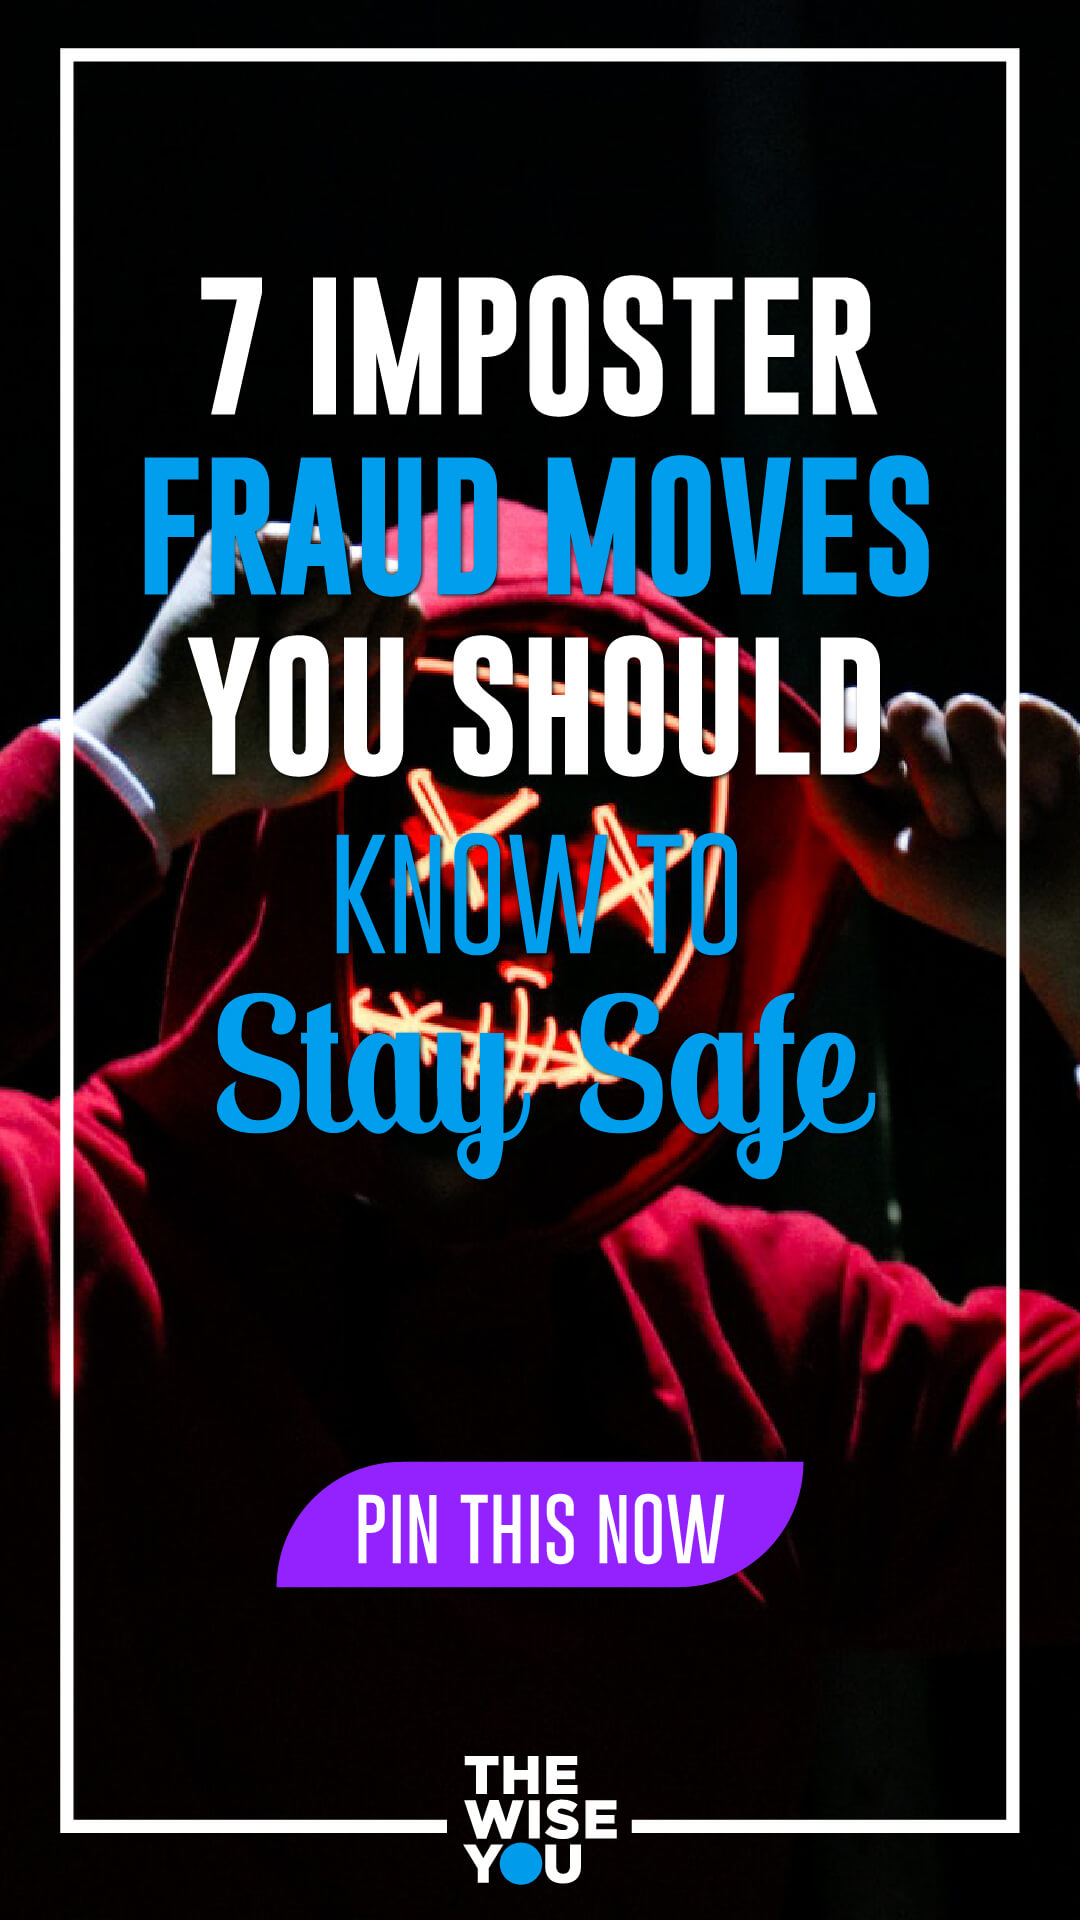 Imposter Fraud Moves You Should Know to Stay Safe